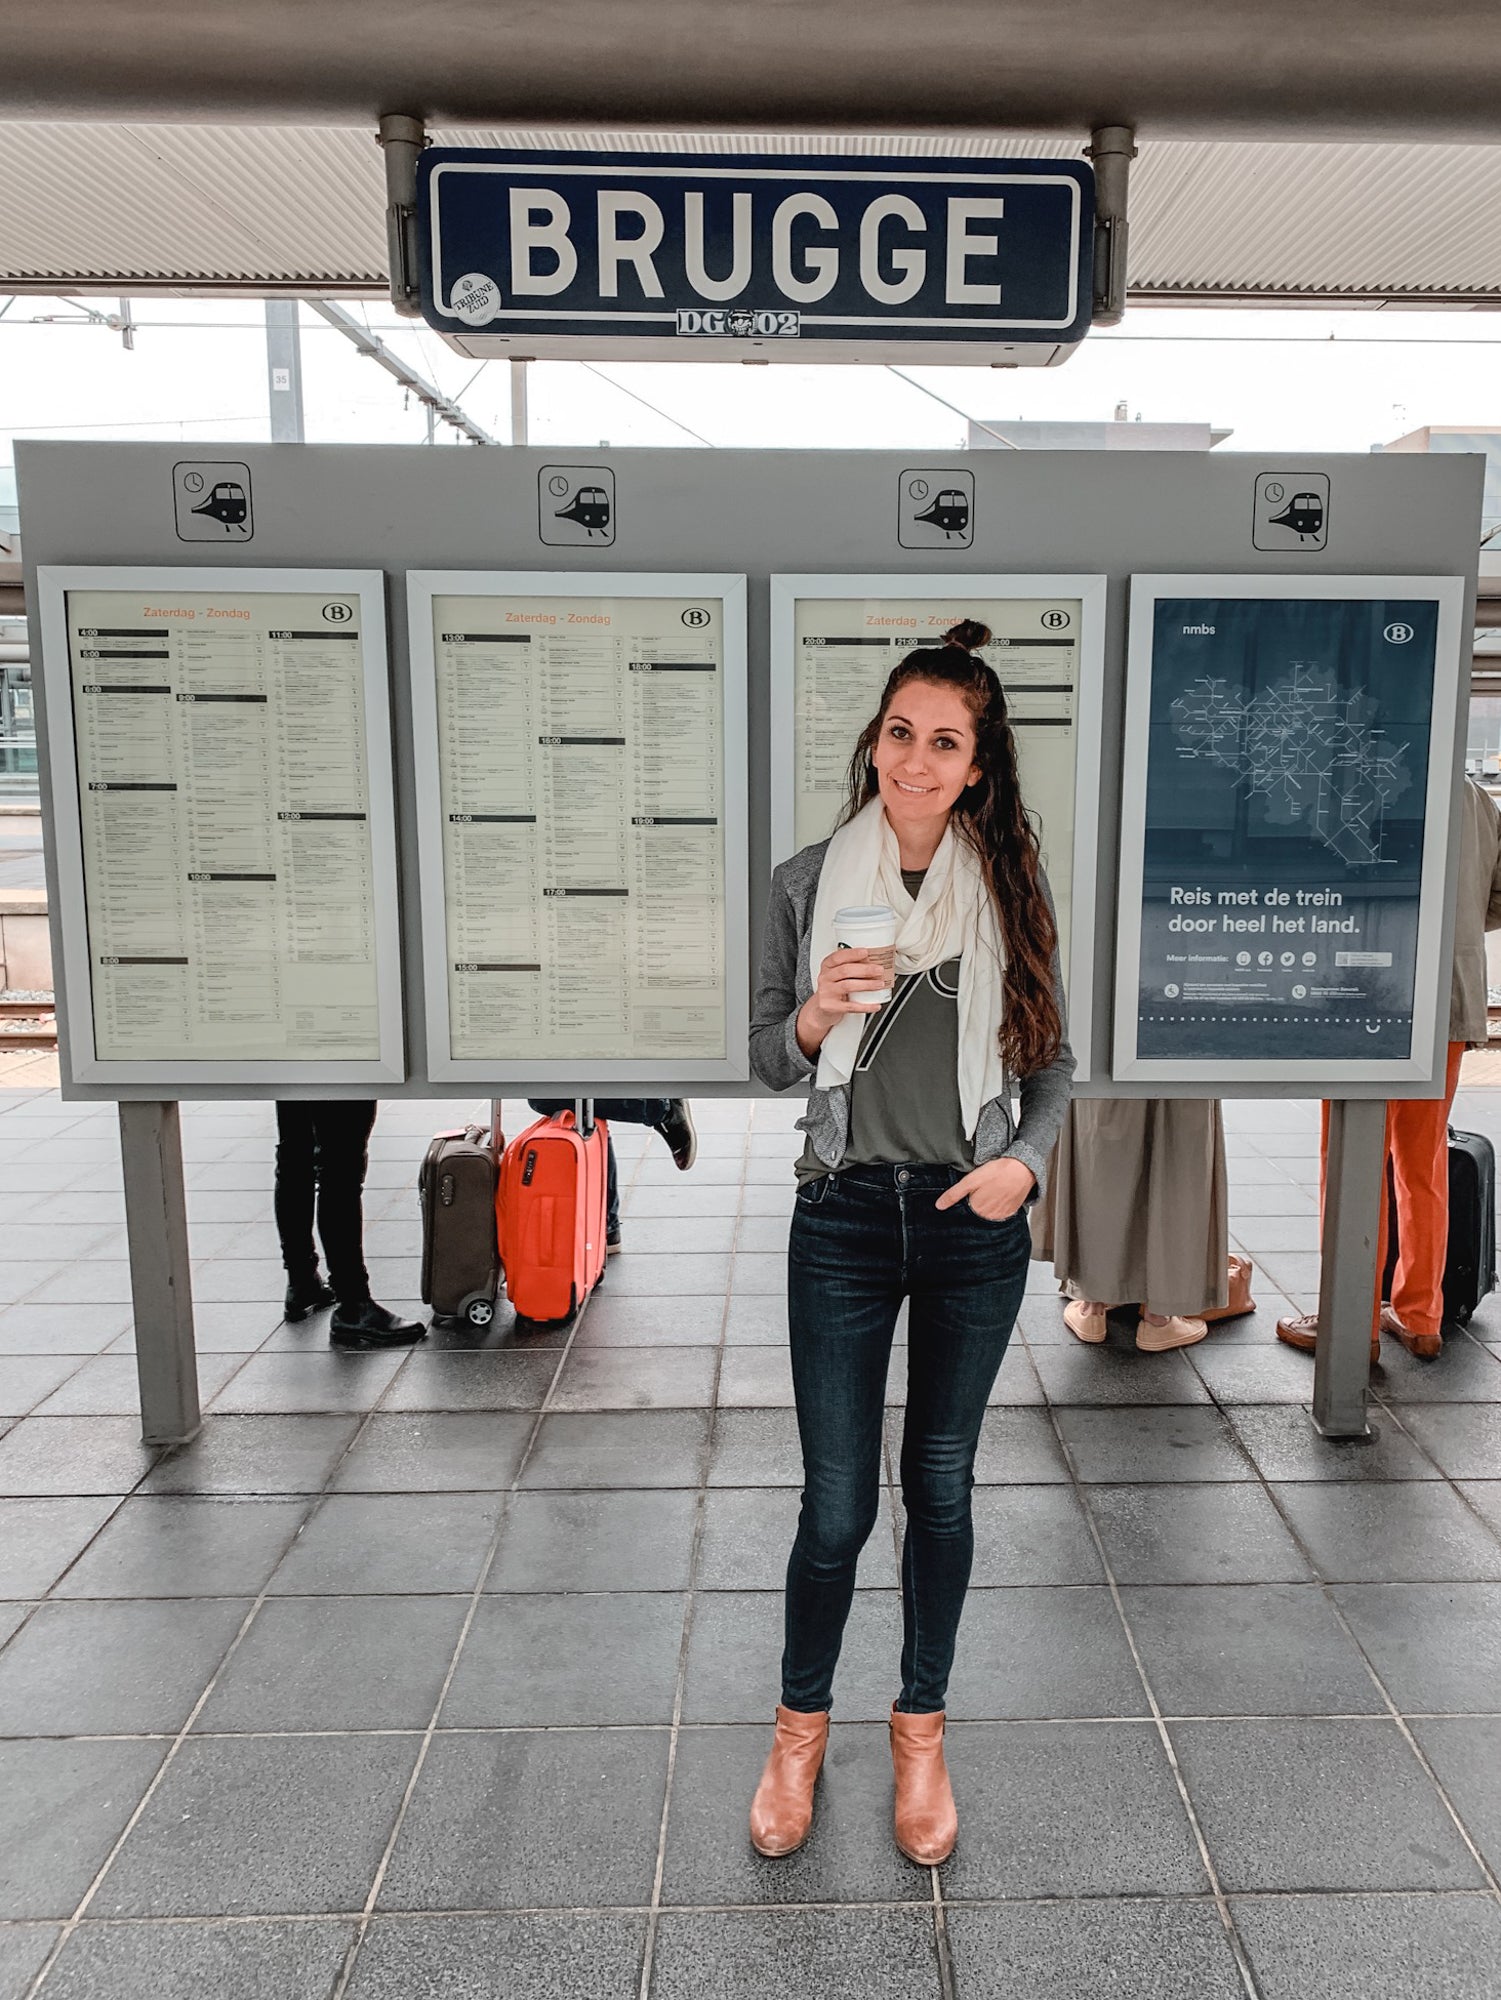 How to book train from Bruges to Brussels